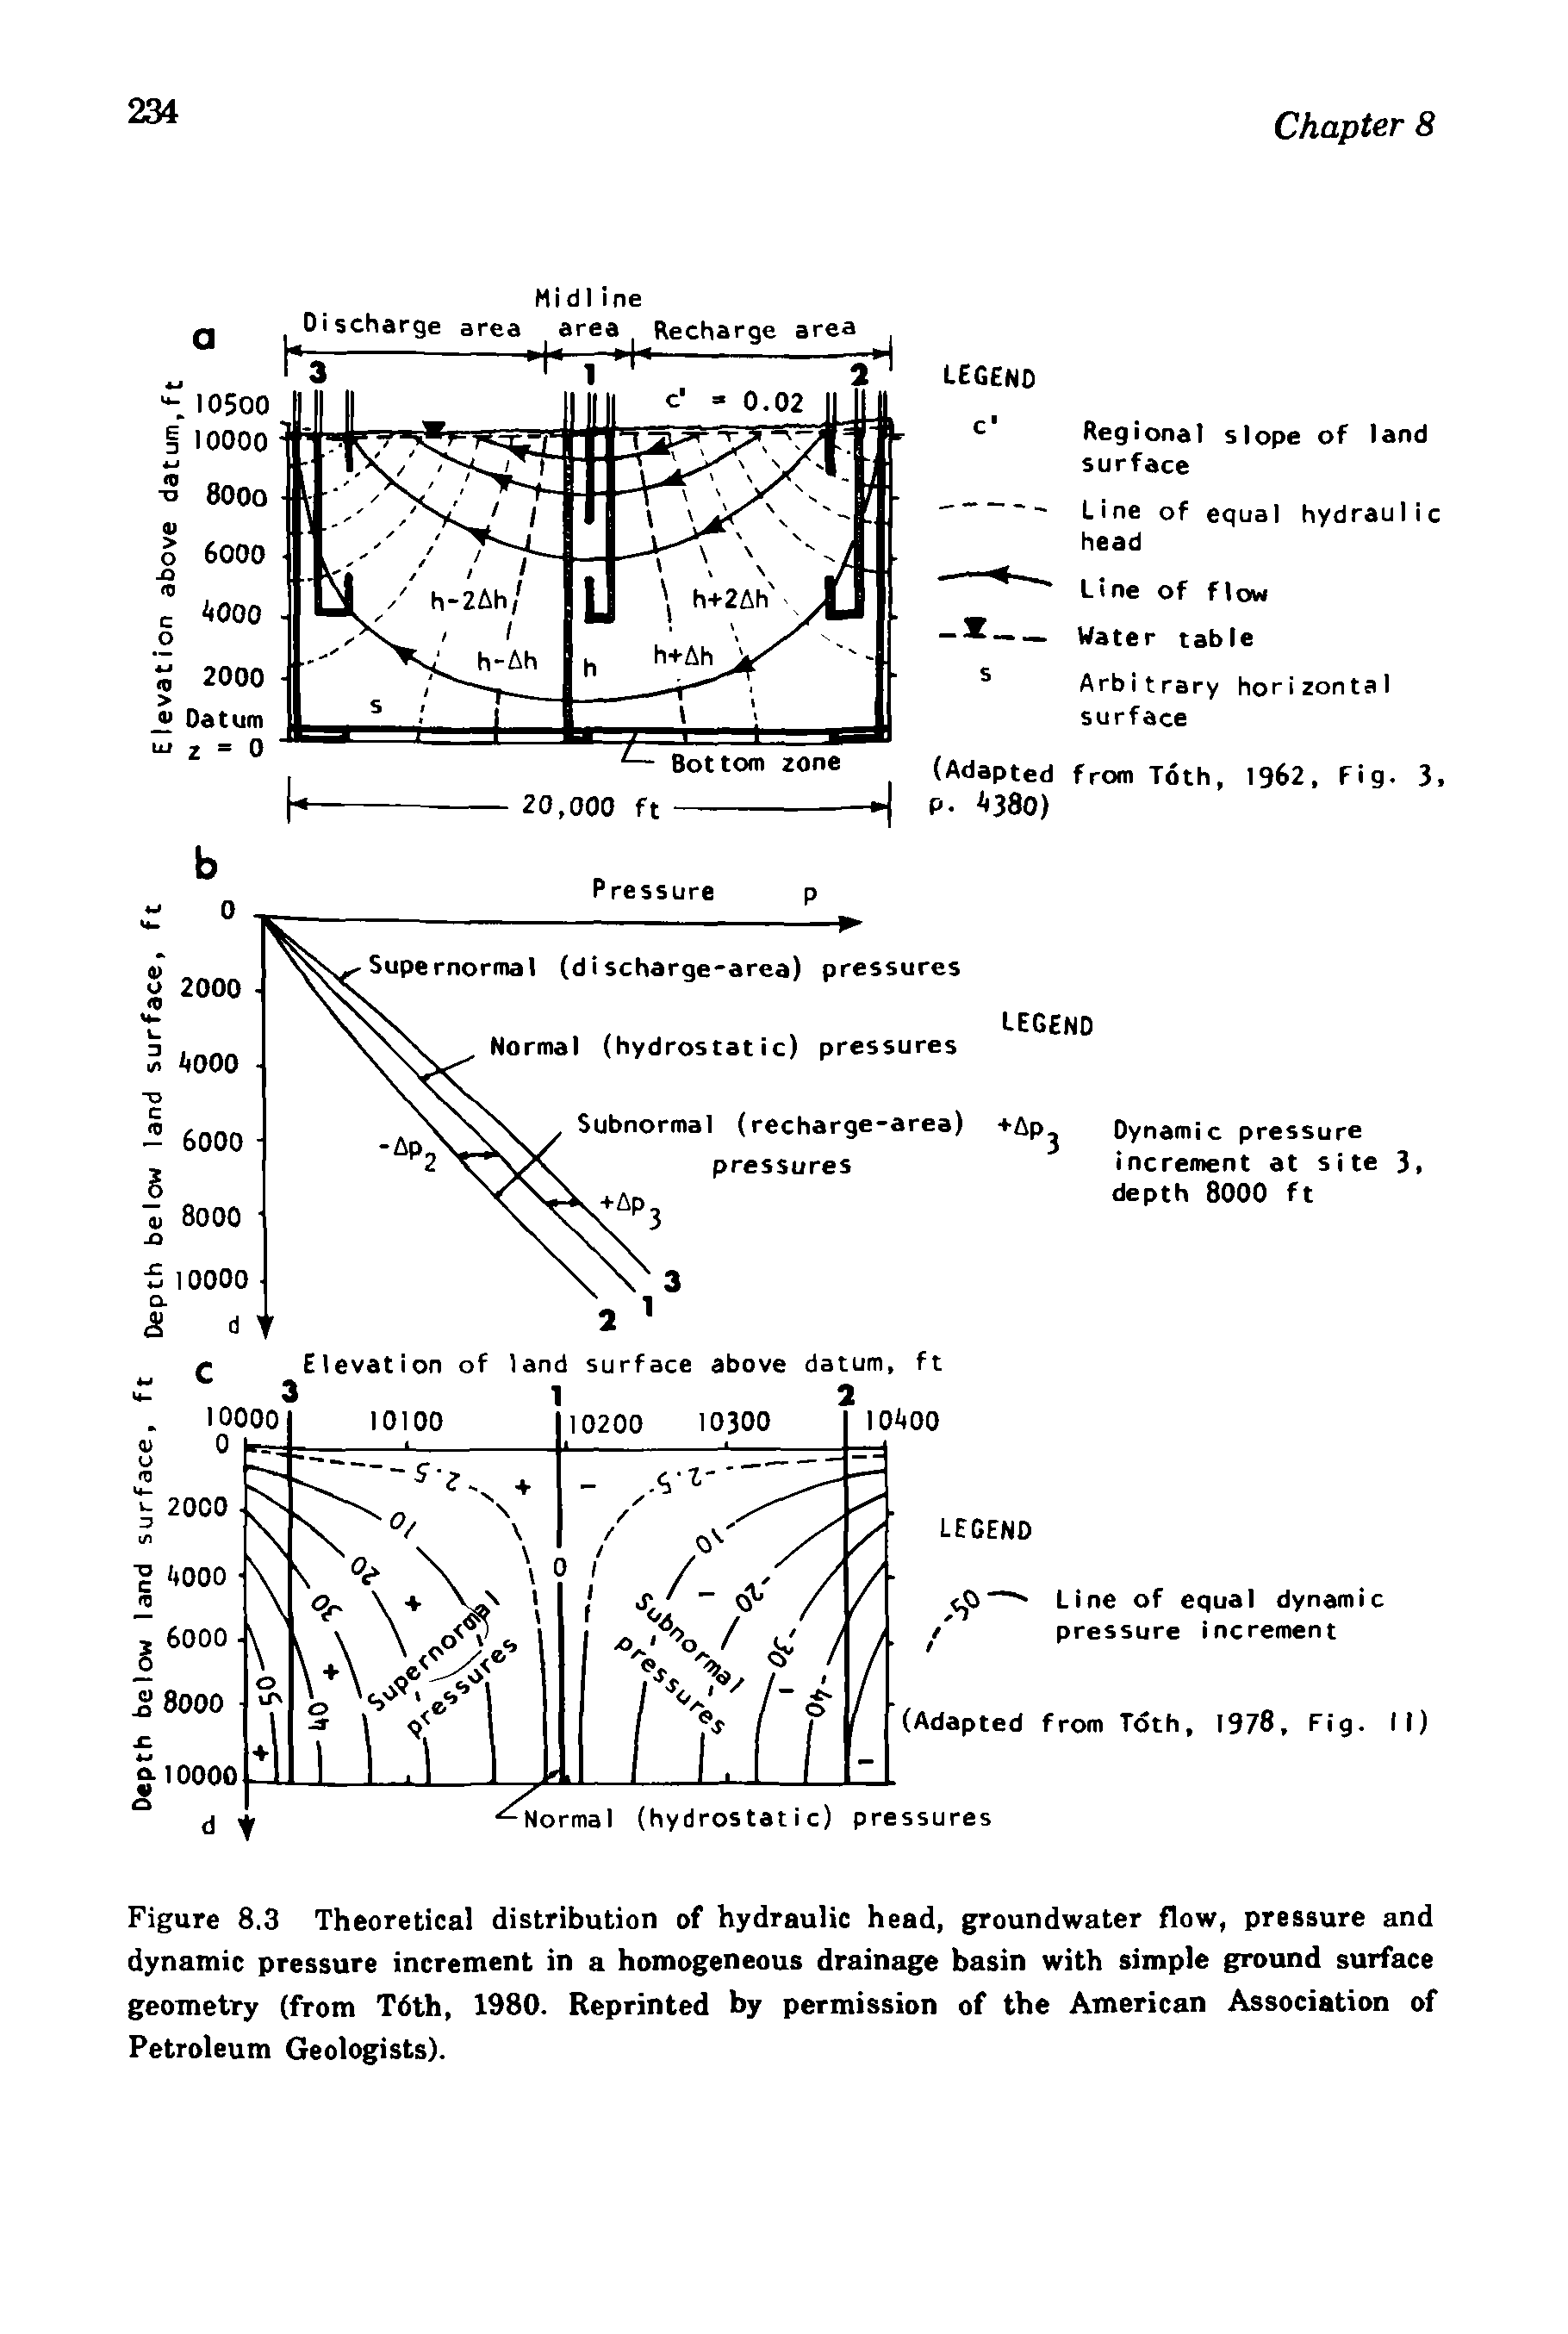 Figure 8.3 Theoretical distribution of hydraulic head, groundwater flow, pressure and dynamic pressure increment in a homogeneous drainage basin with simple ground surface geometry (from T6th, 1980. Reprinted by permission of the American Association of Petroleum Geologists).